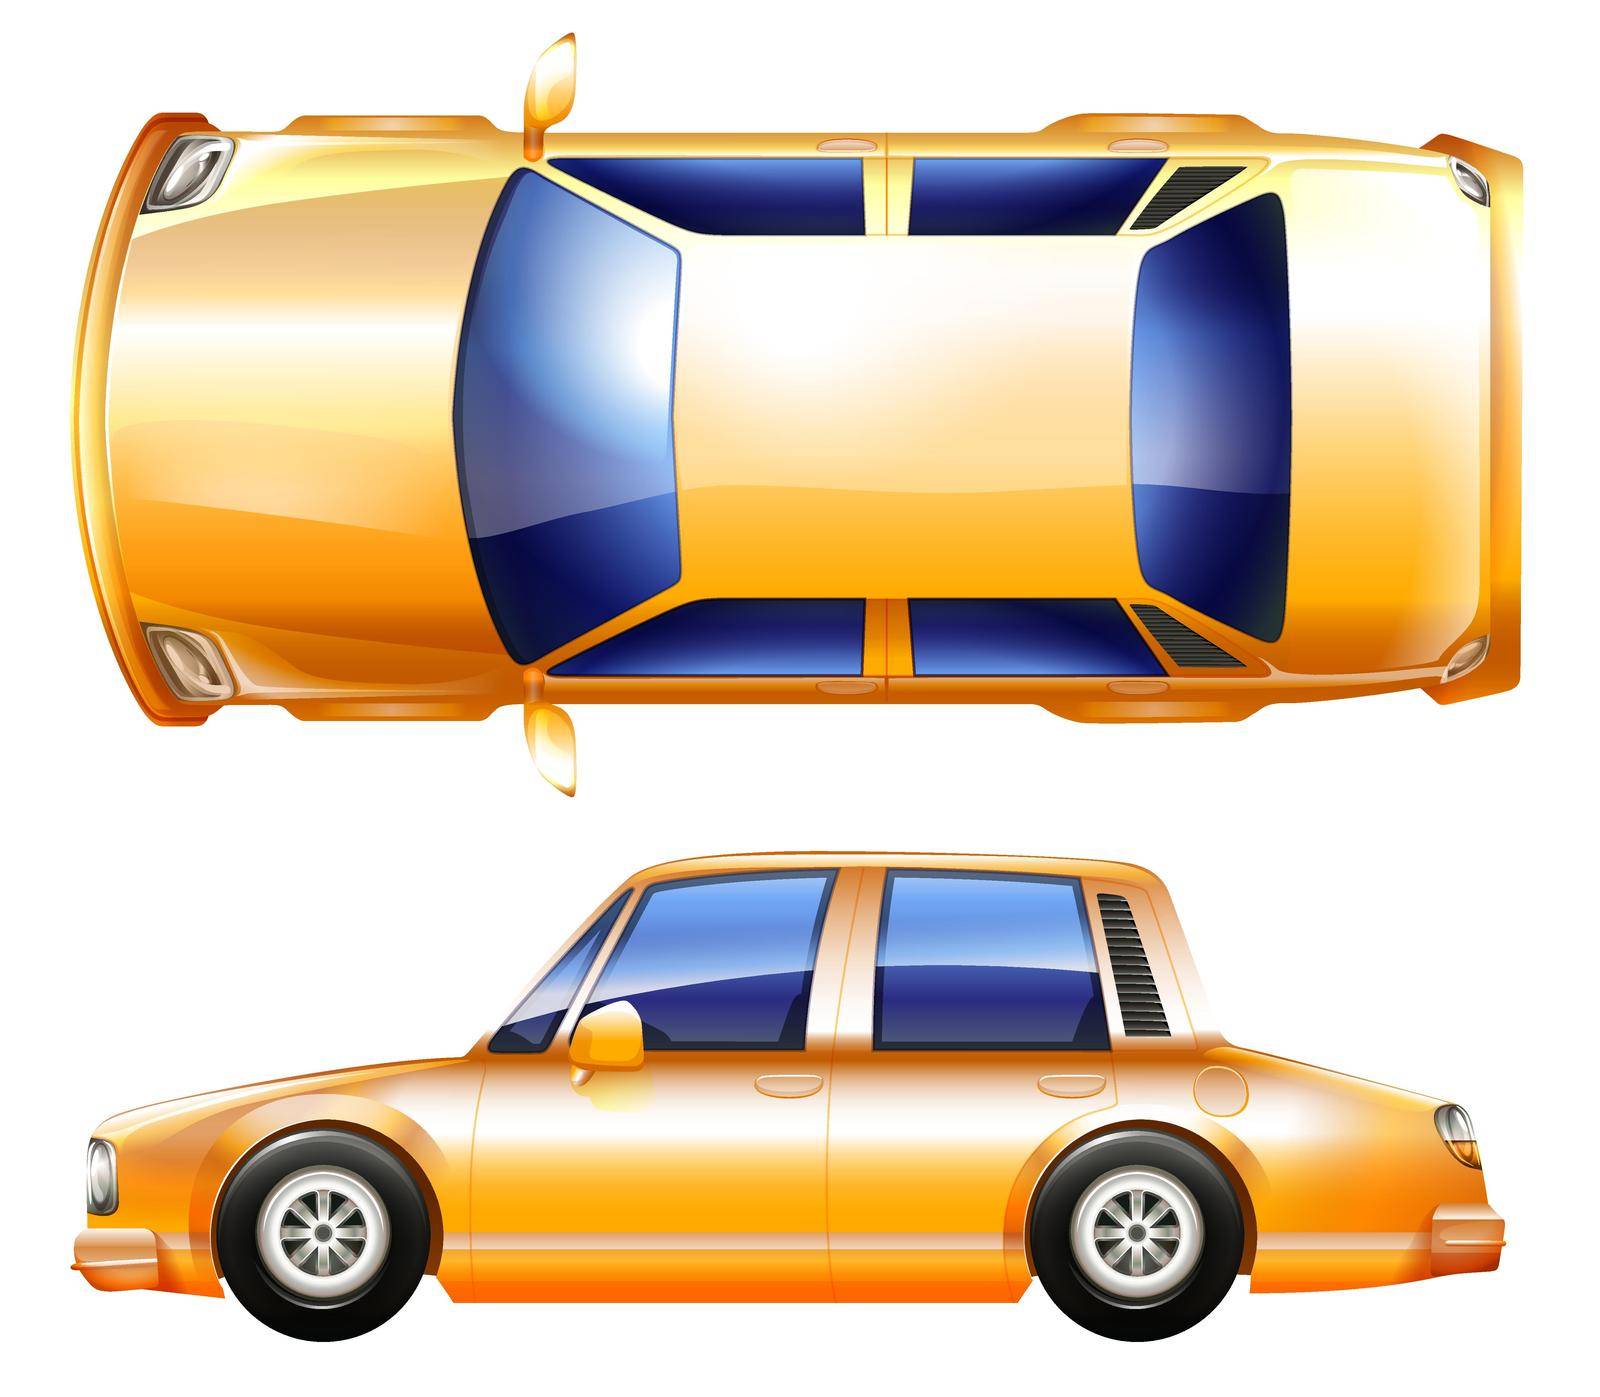 A yellow vehicle on a white background